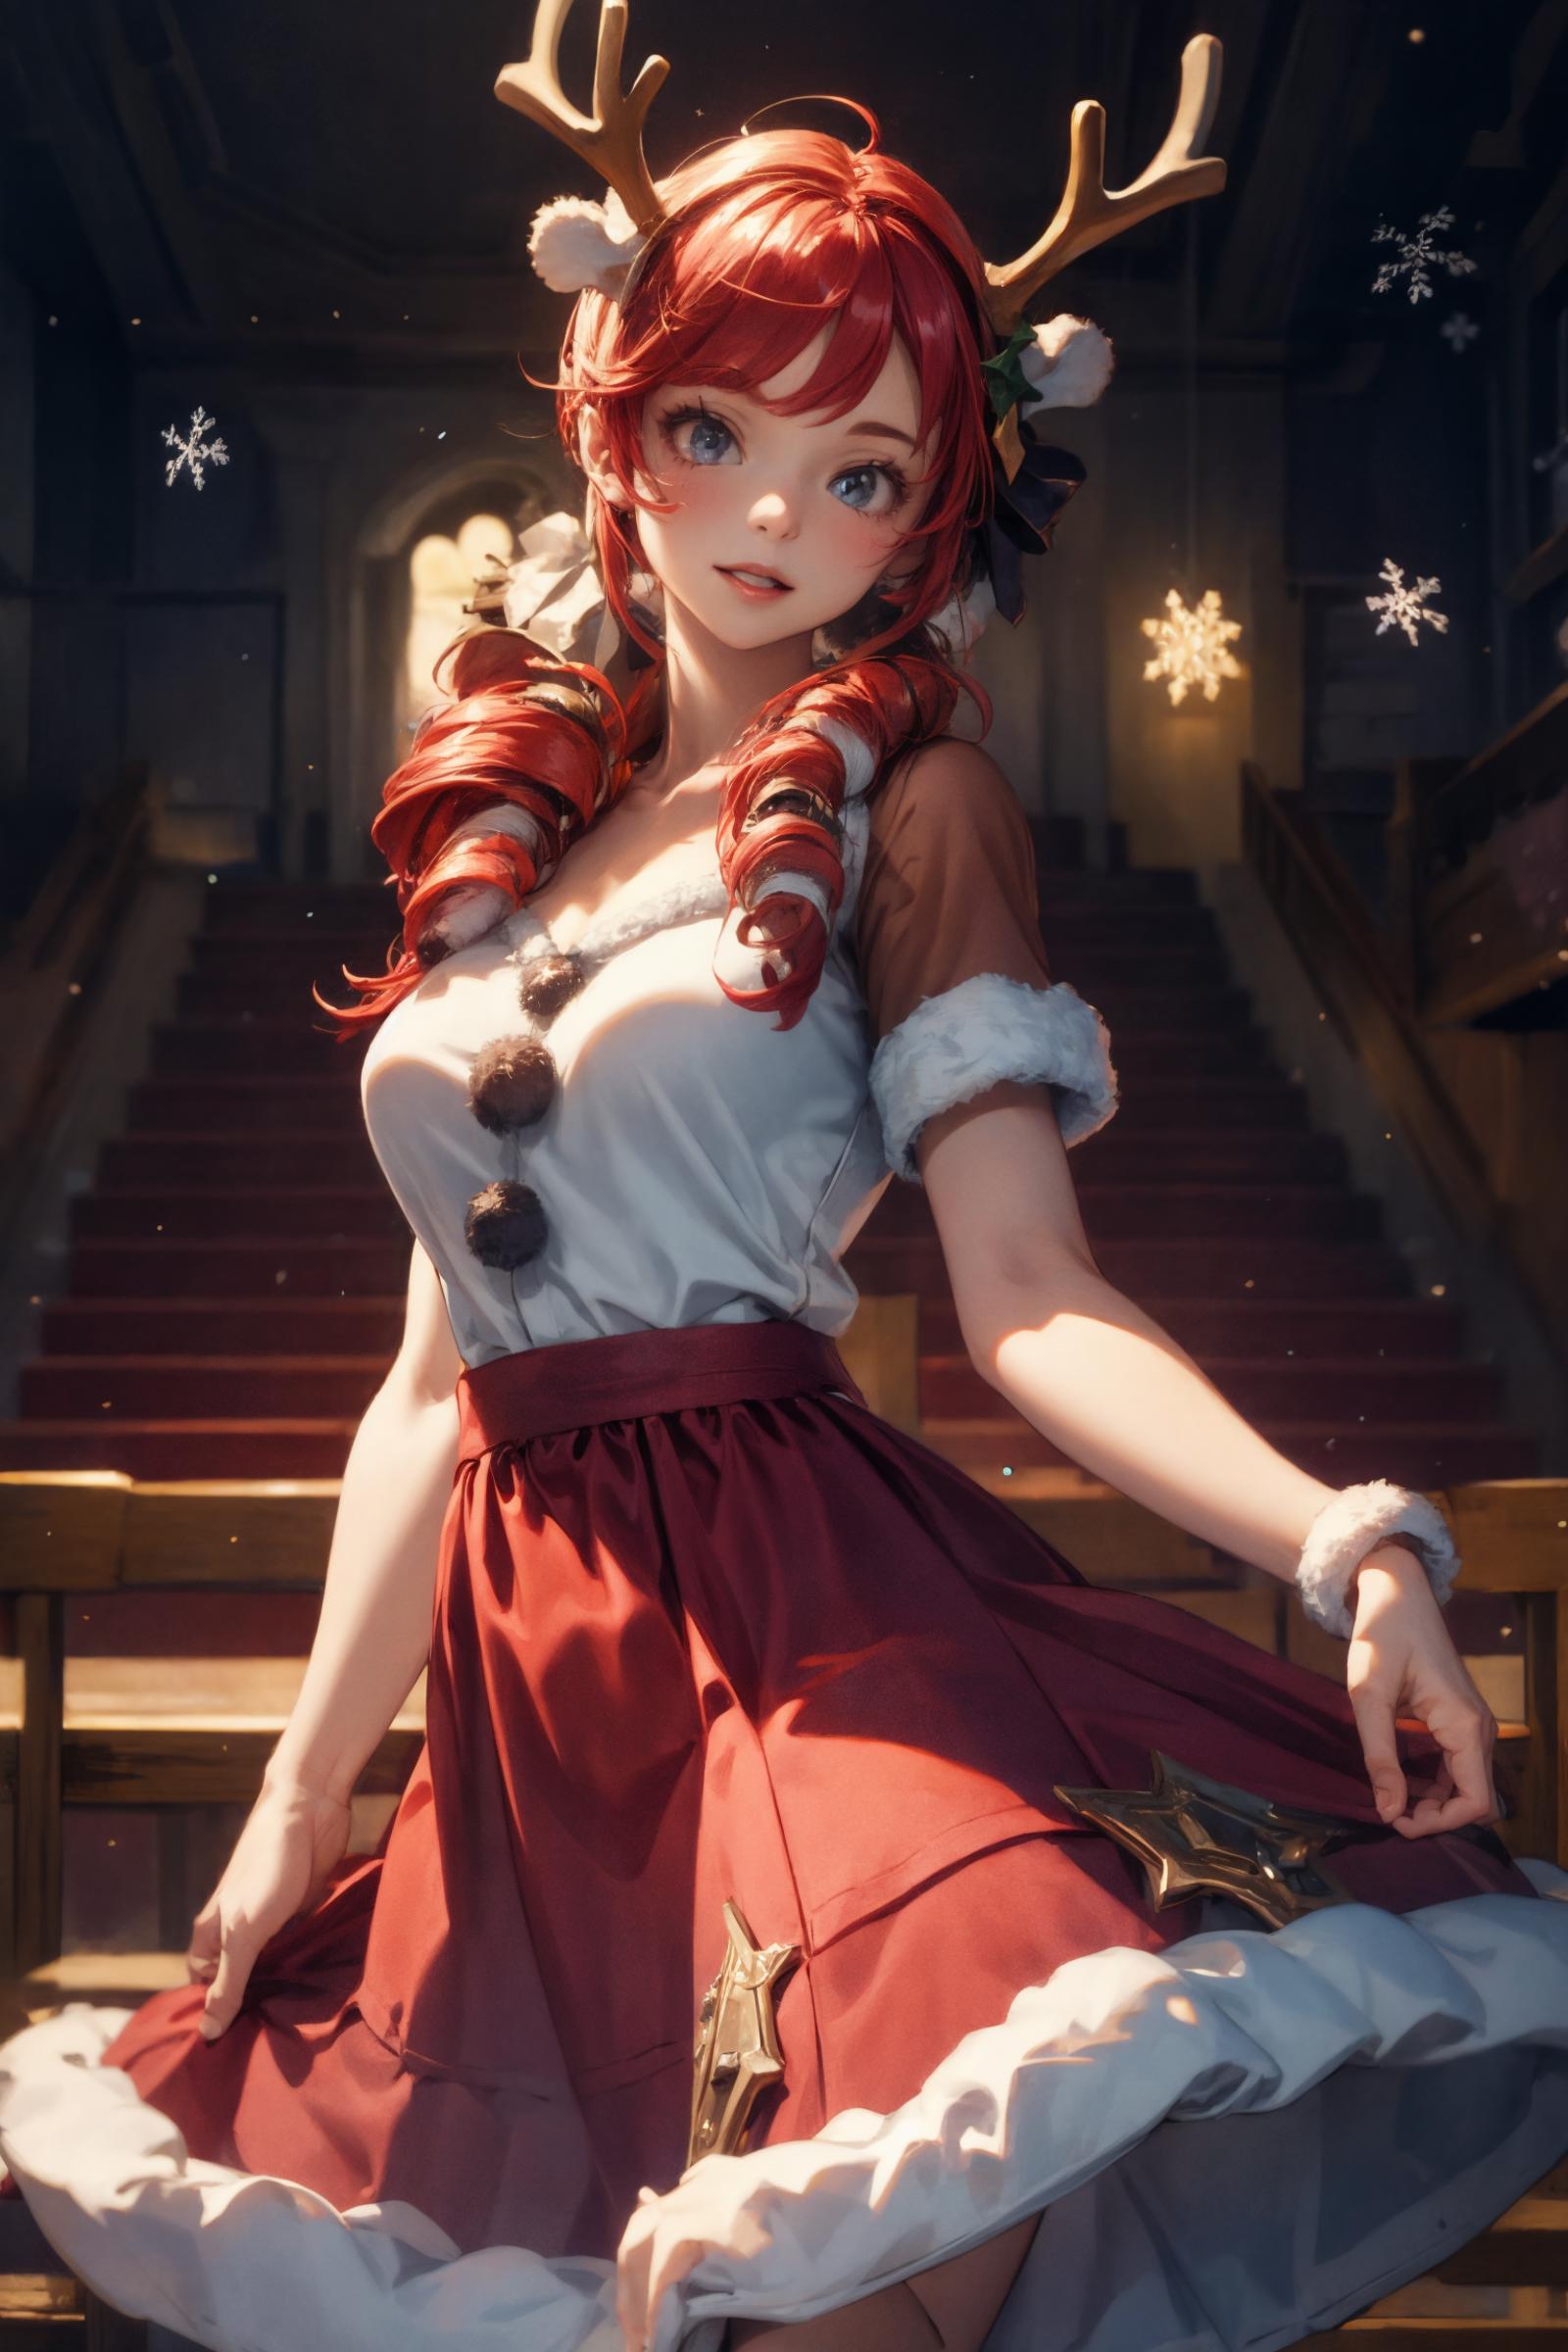 Anime-style drawing of a woman in a red dress with white accents, wearing a Santa hat and standing near a staircase.